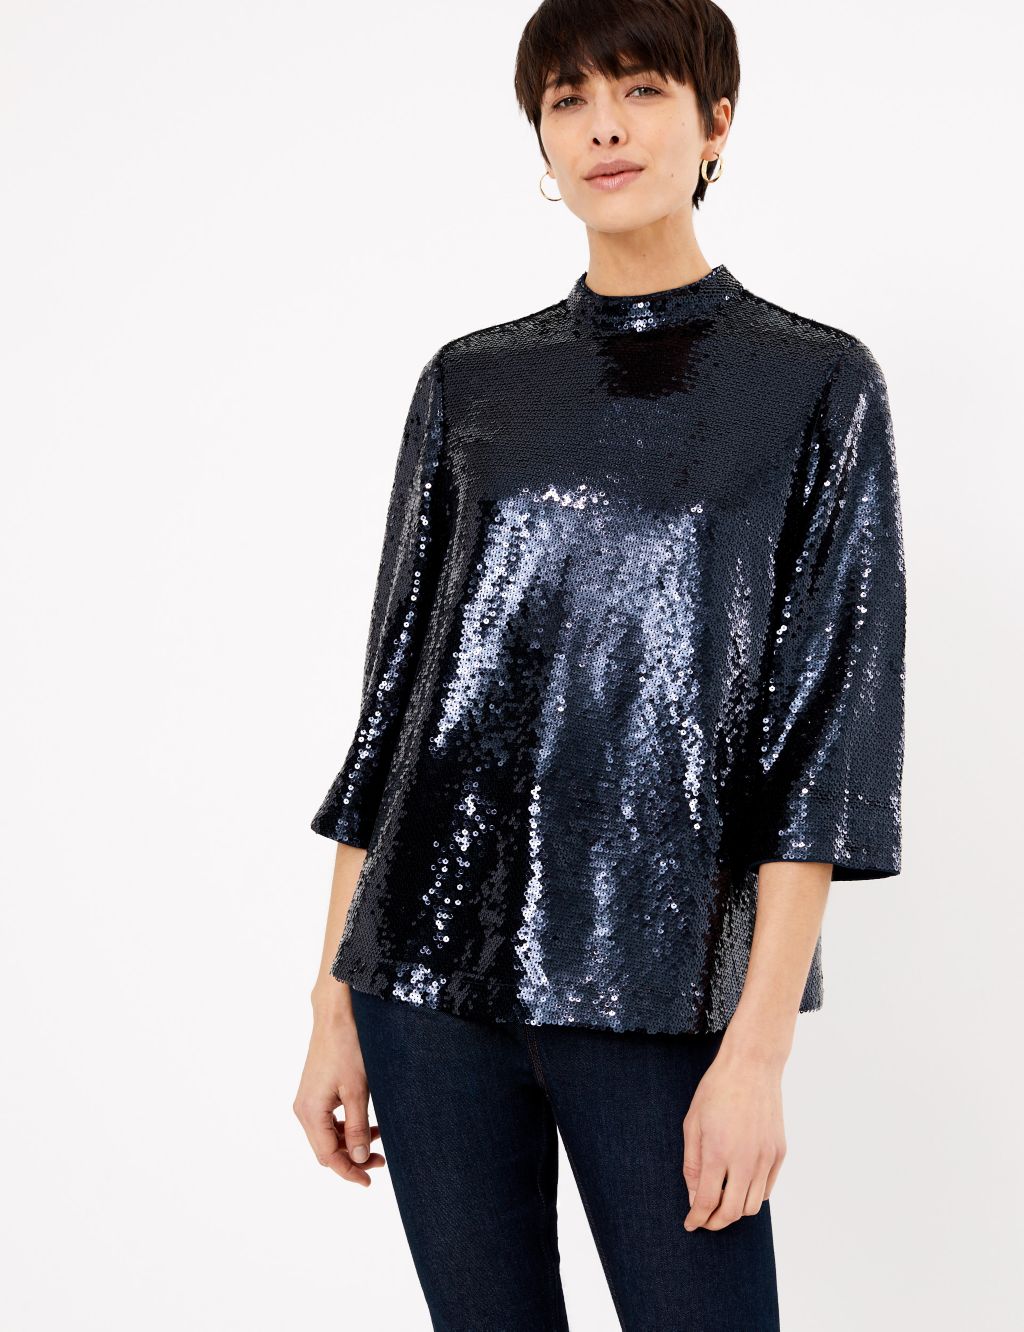 Sequin 3/4 Sleeve Blouse | M&S Collection | M&S